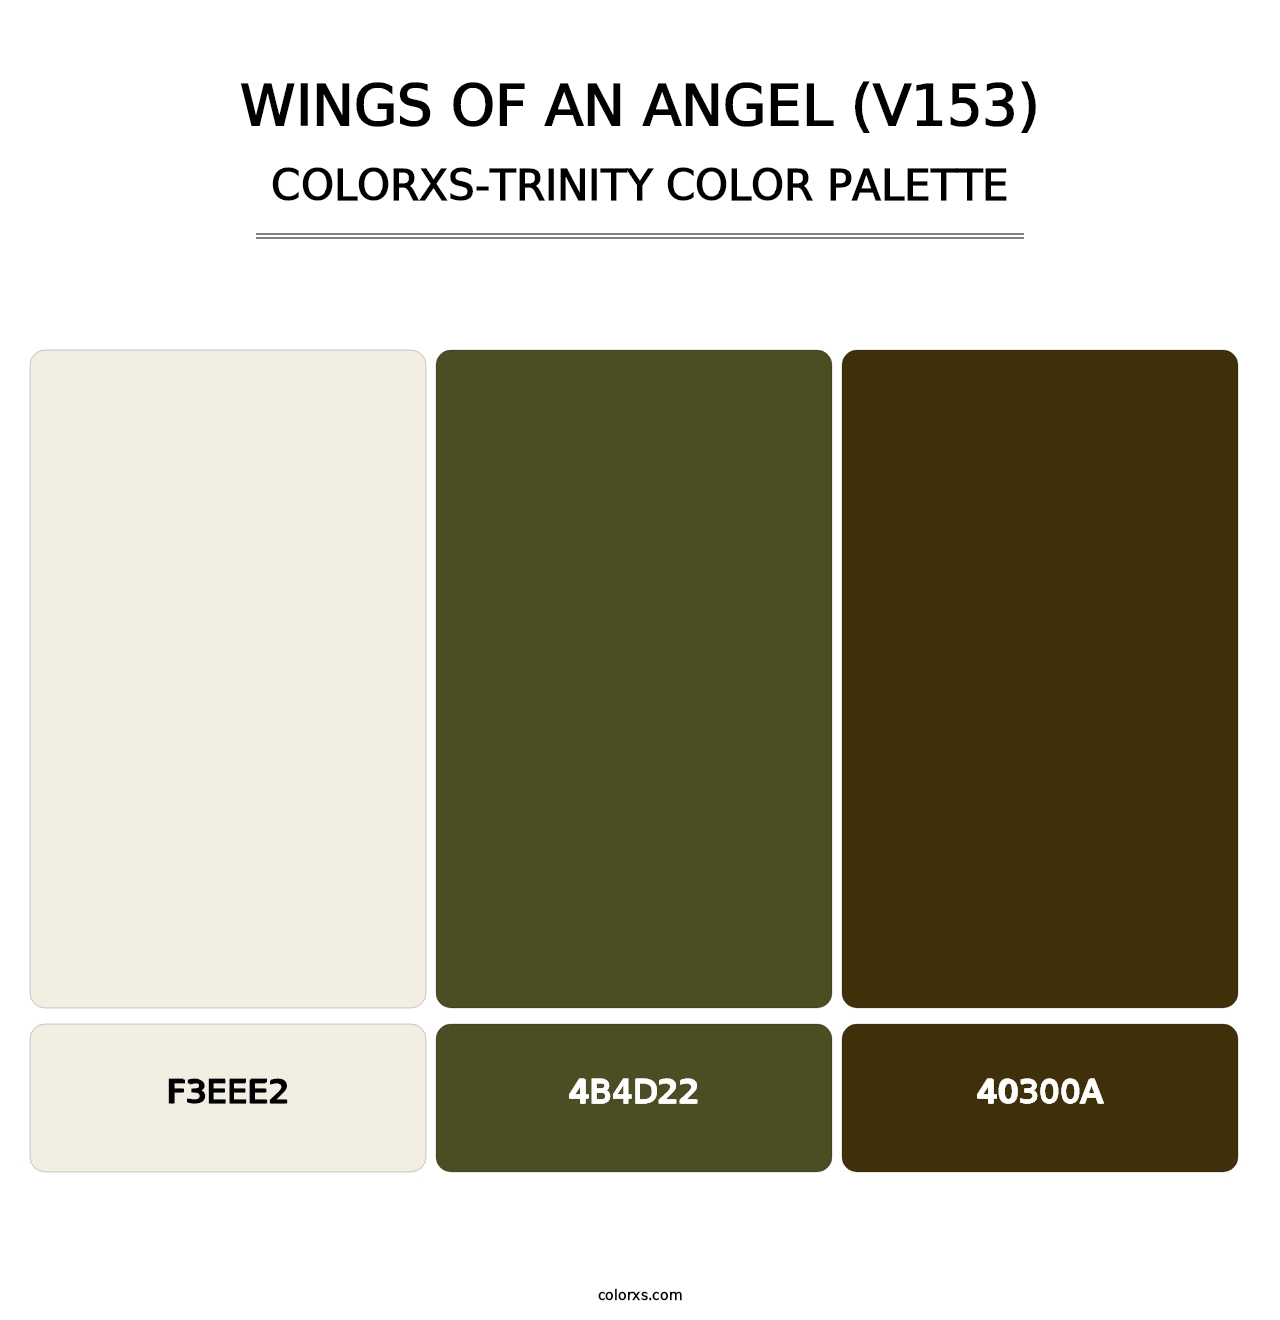 Wings of an Angel (V153) - Colorxs Trinity Palette